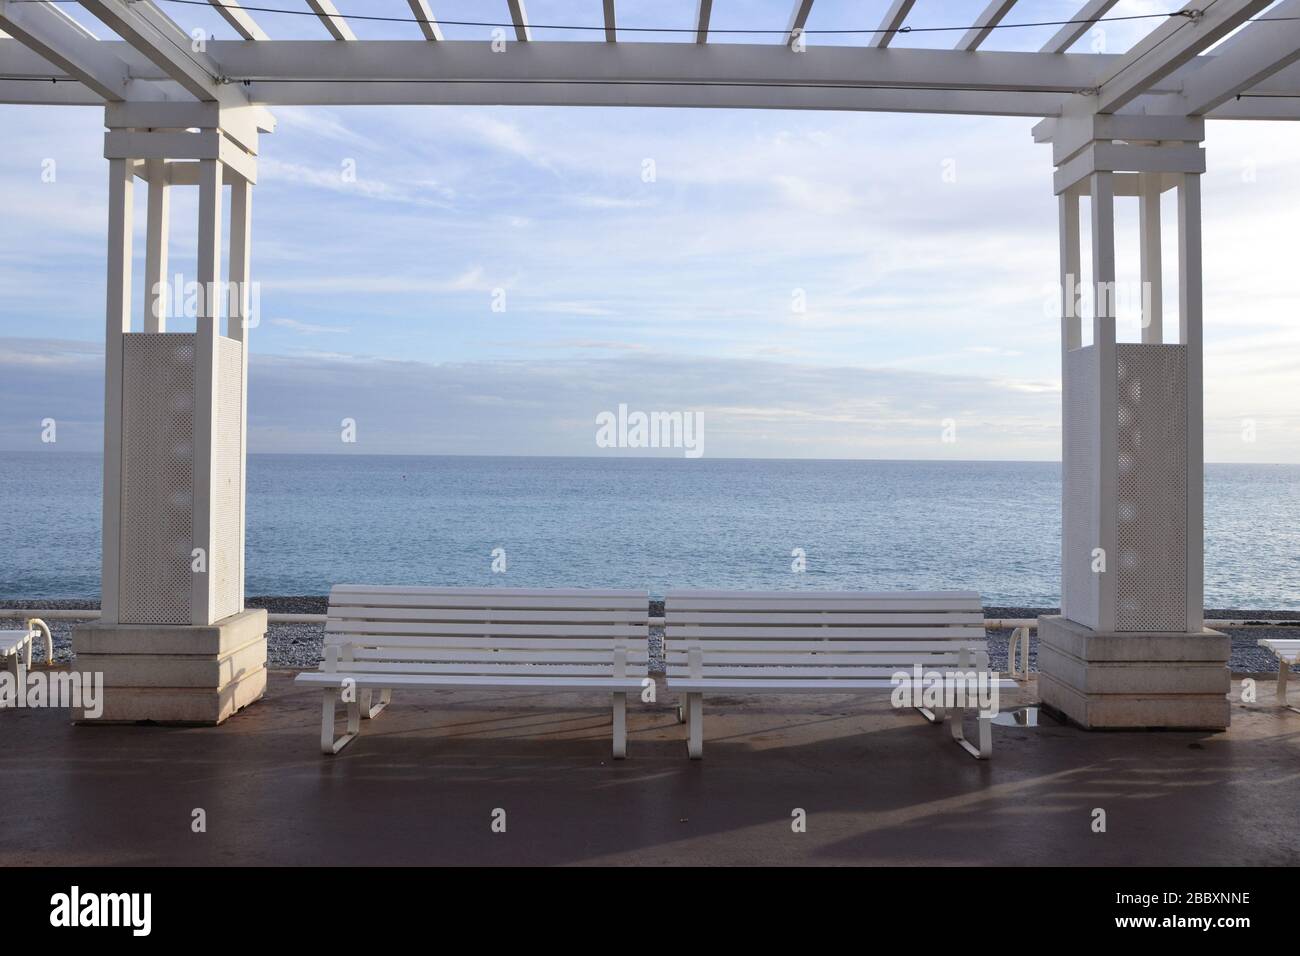 The Promenade des anglais in Nice (France), Europe Stock Photo